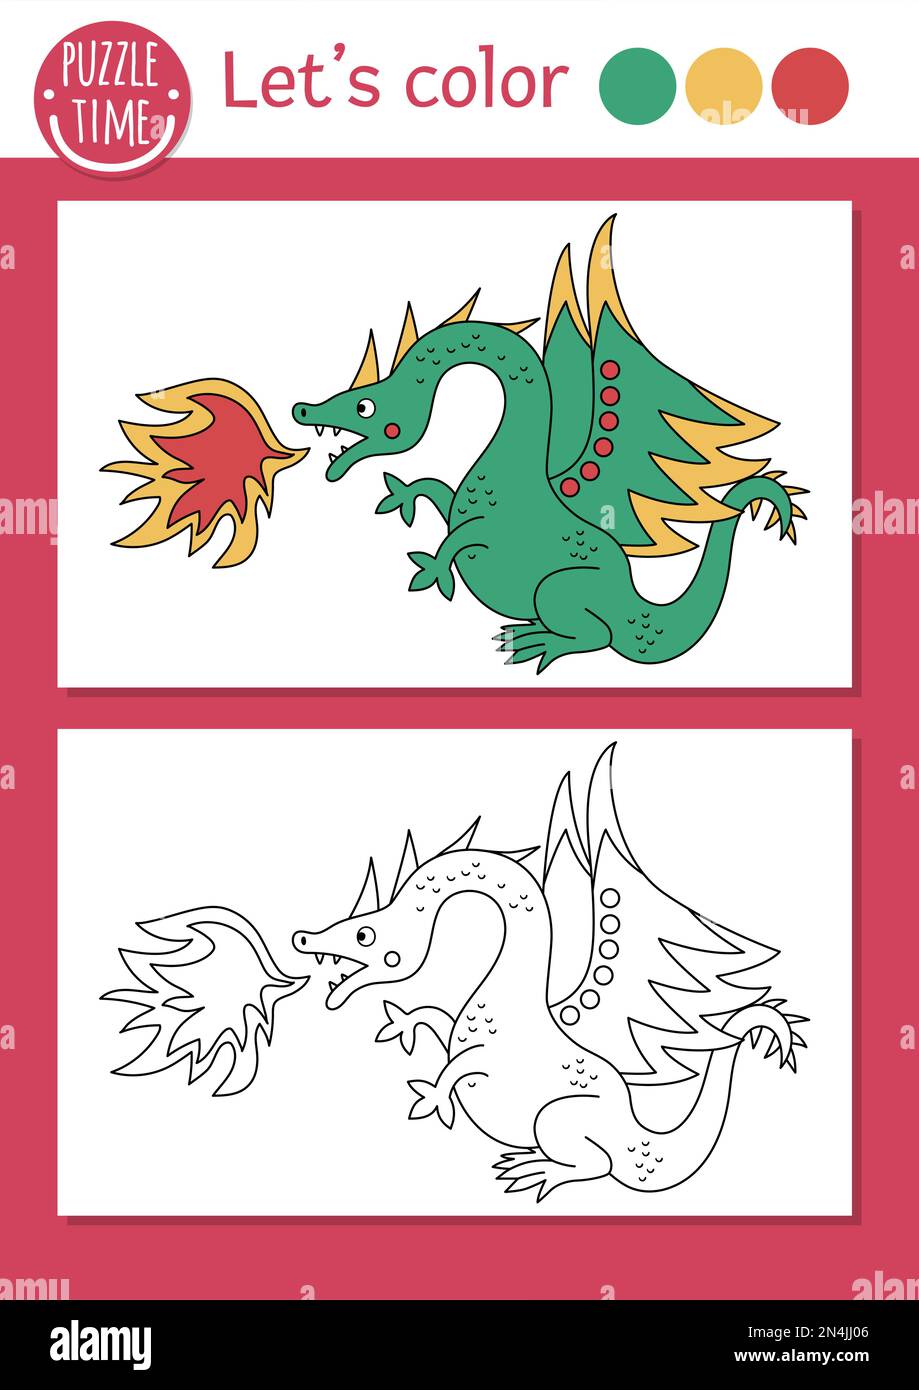 Magic kingdom coloring page for children with dragon, fire. Vector fairytale outline illustration with cute fantasy creature. Color book for kids with Stock Vector